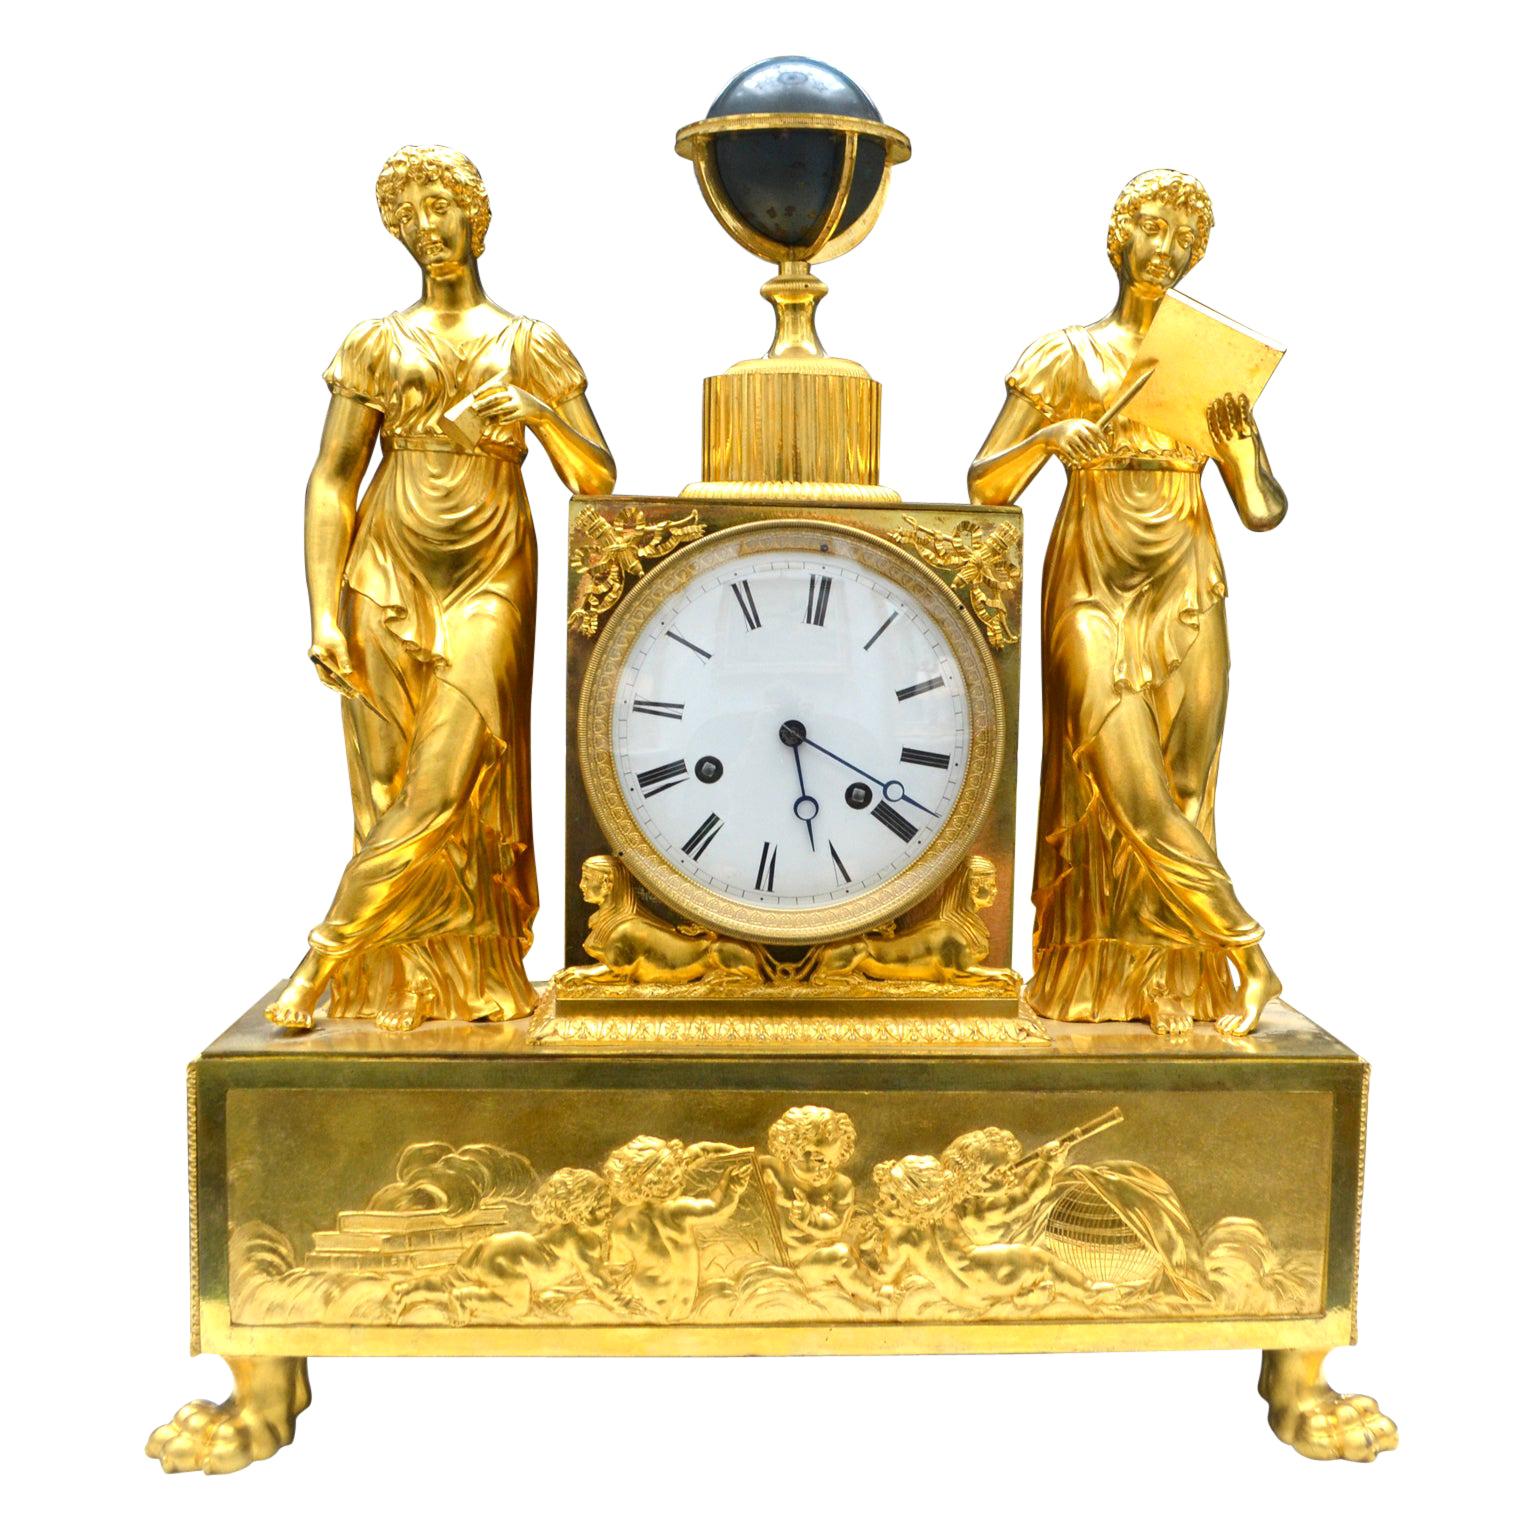  French Empire Gilt Bronze Allegorical Clock Depicting the Astronomical Sciences For Sale